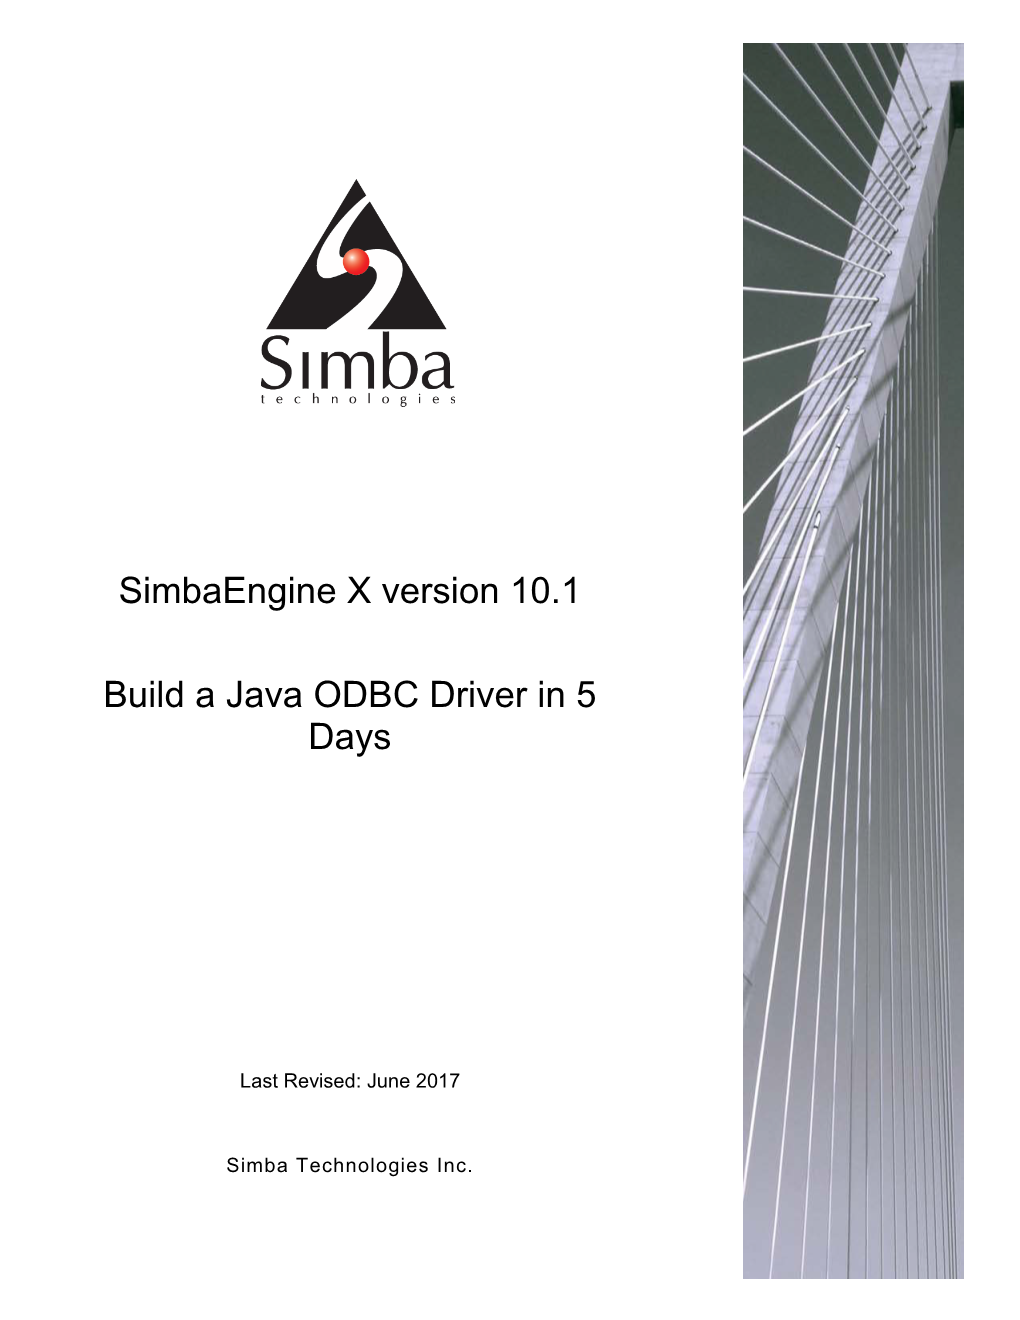 Simbaengine X Version 10.1 Build a Java ODBC Driver in 5 Days